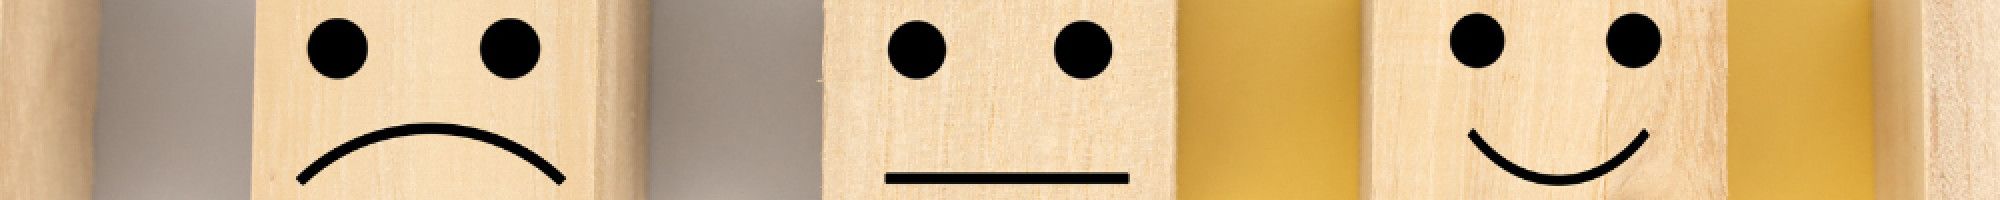 Wooden boxes with smiley and sad faces